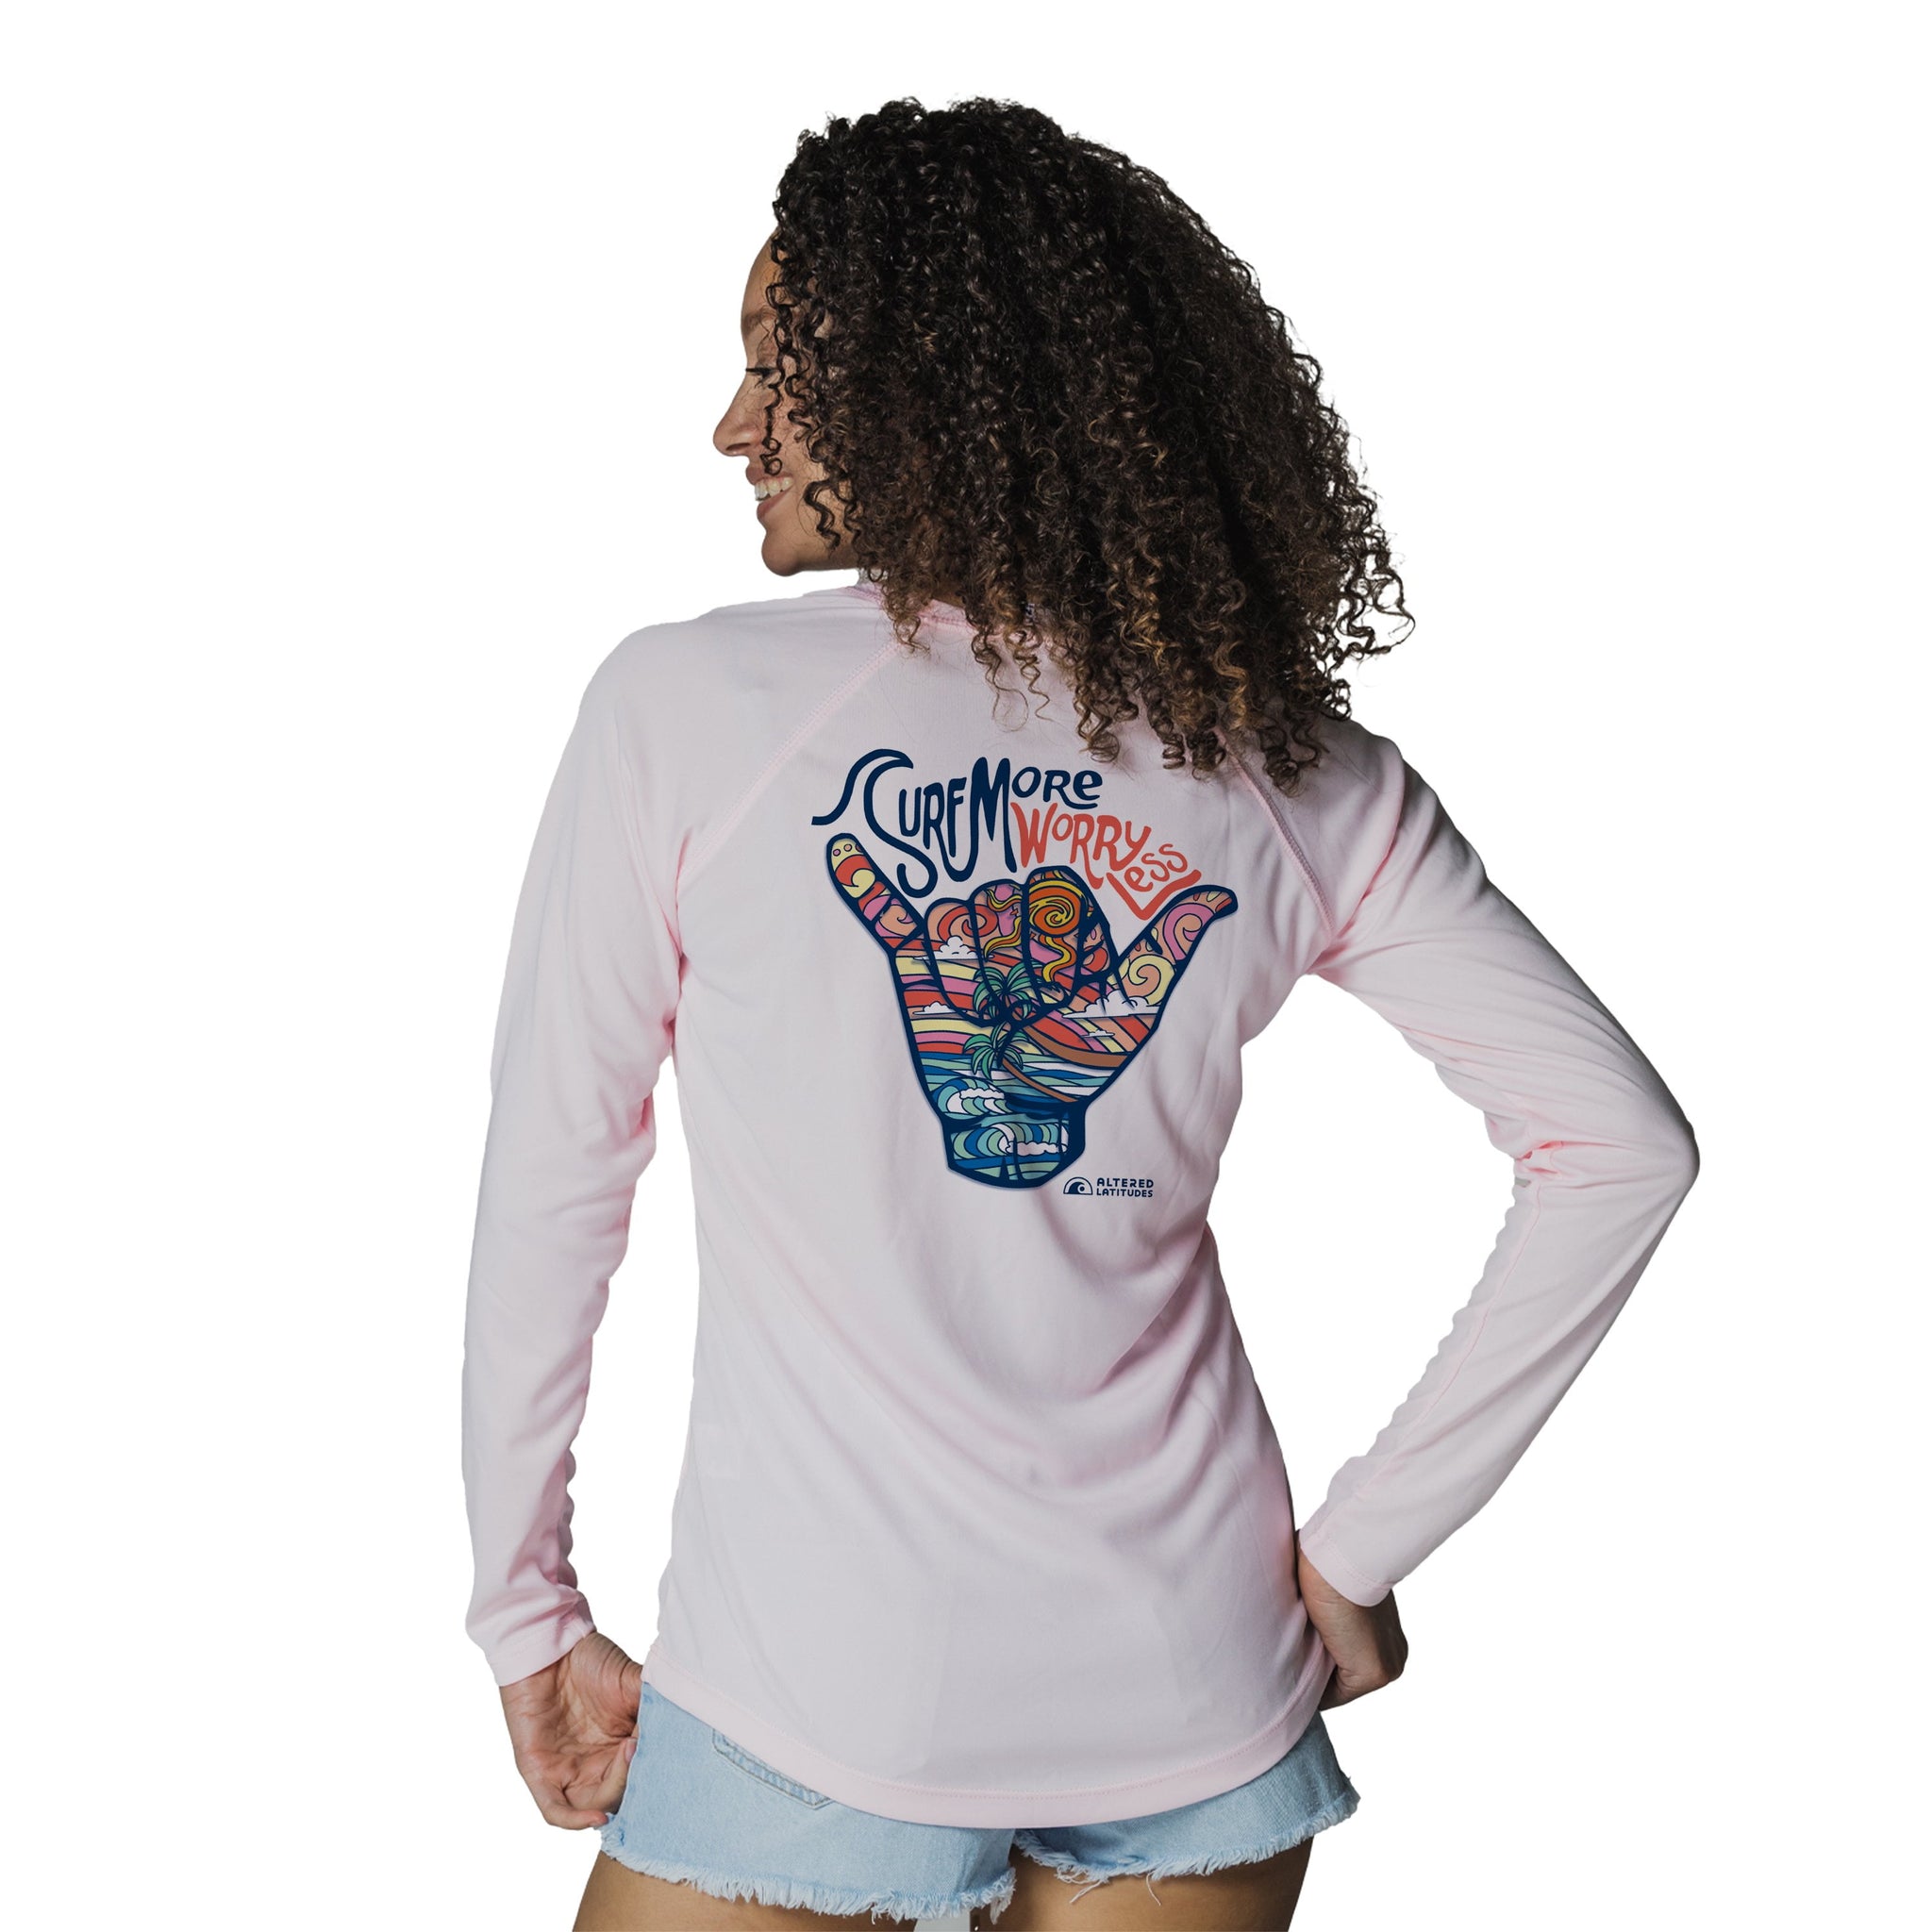 Women's Surf More Worry Less UPF 50 Long Sleeve